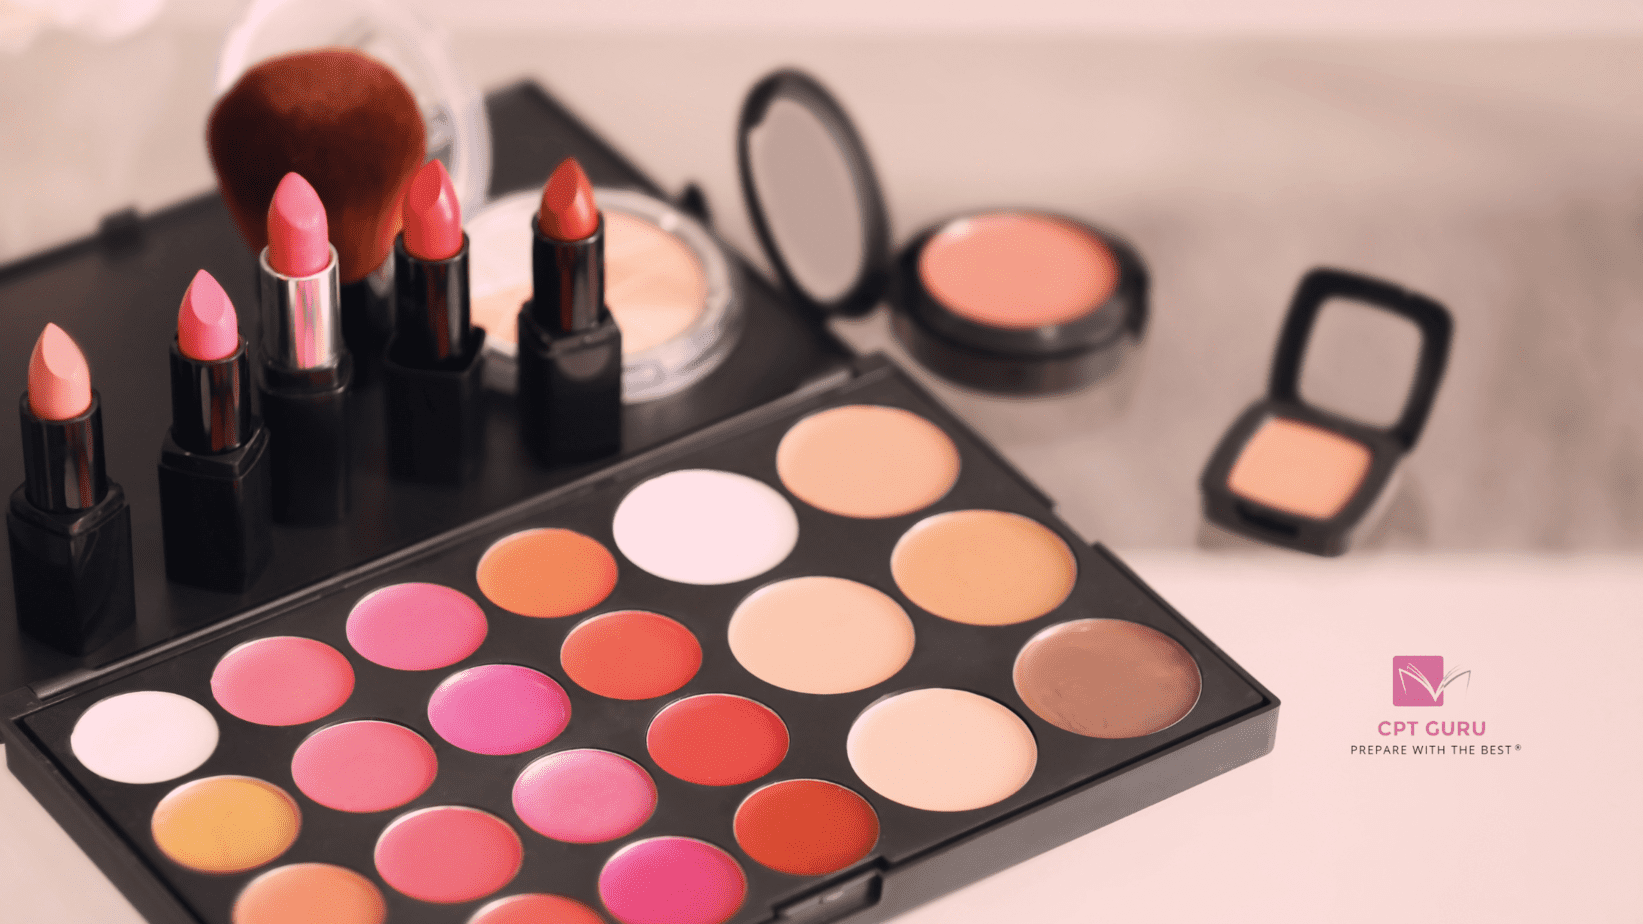 Cosmetology student kit list: The supplies you'll need for cosmetology school